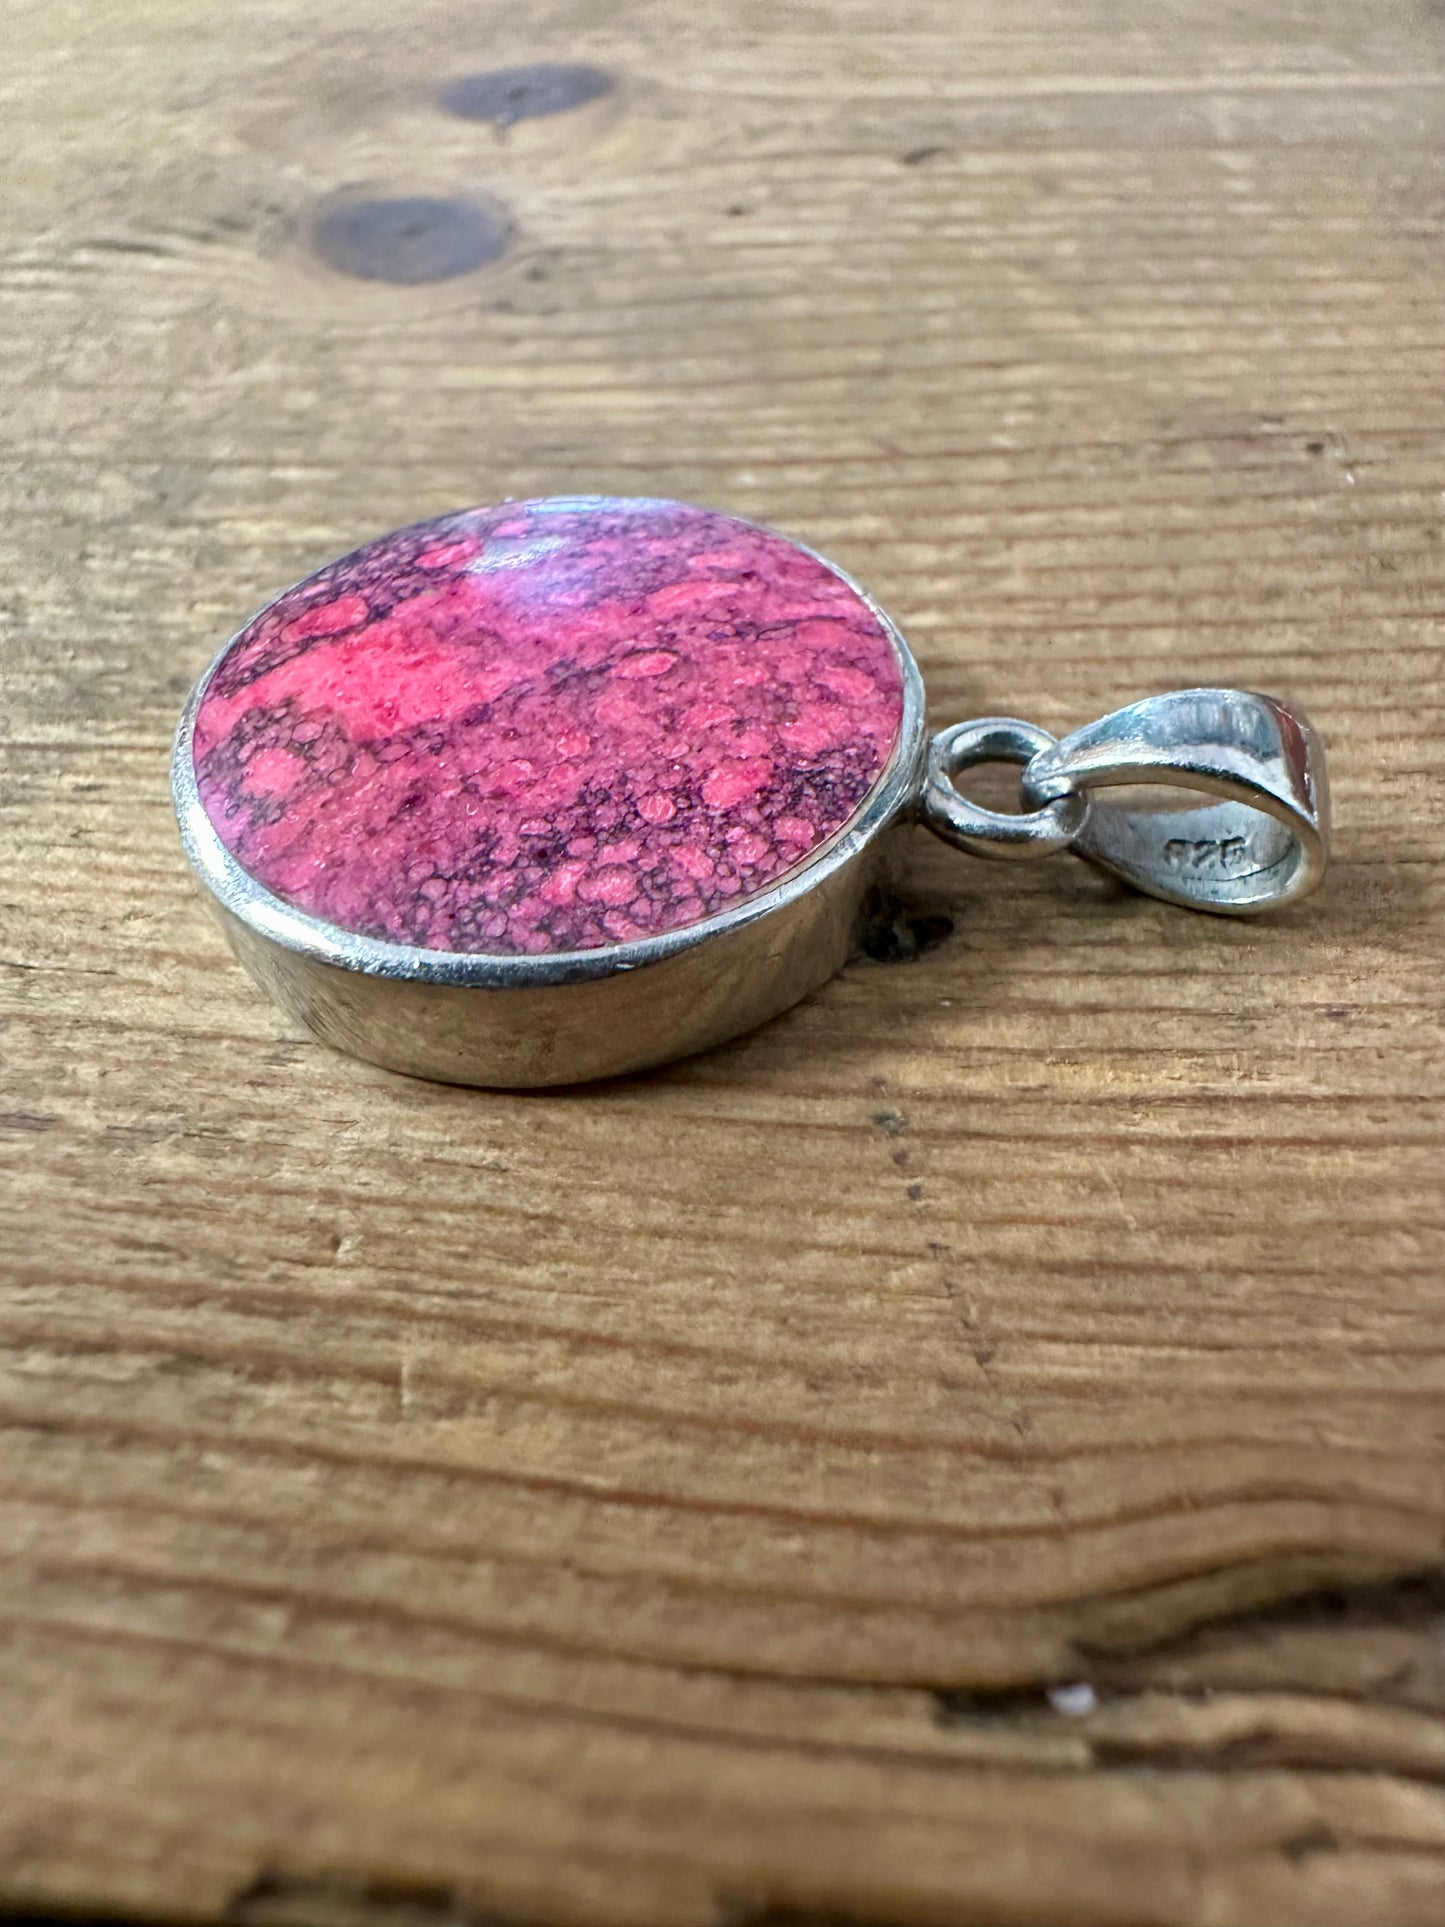 Modernist Pink and Black Circle 925 Silver Pendant